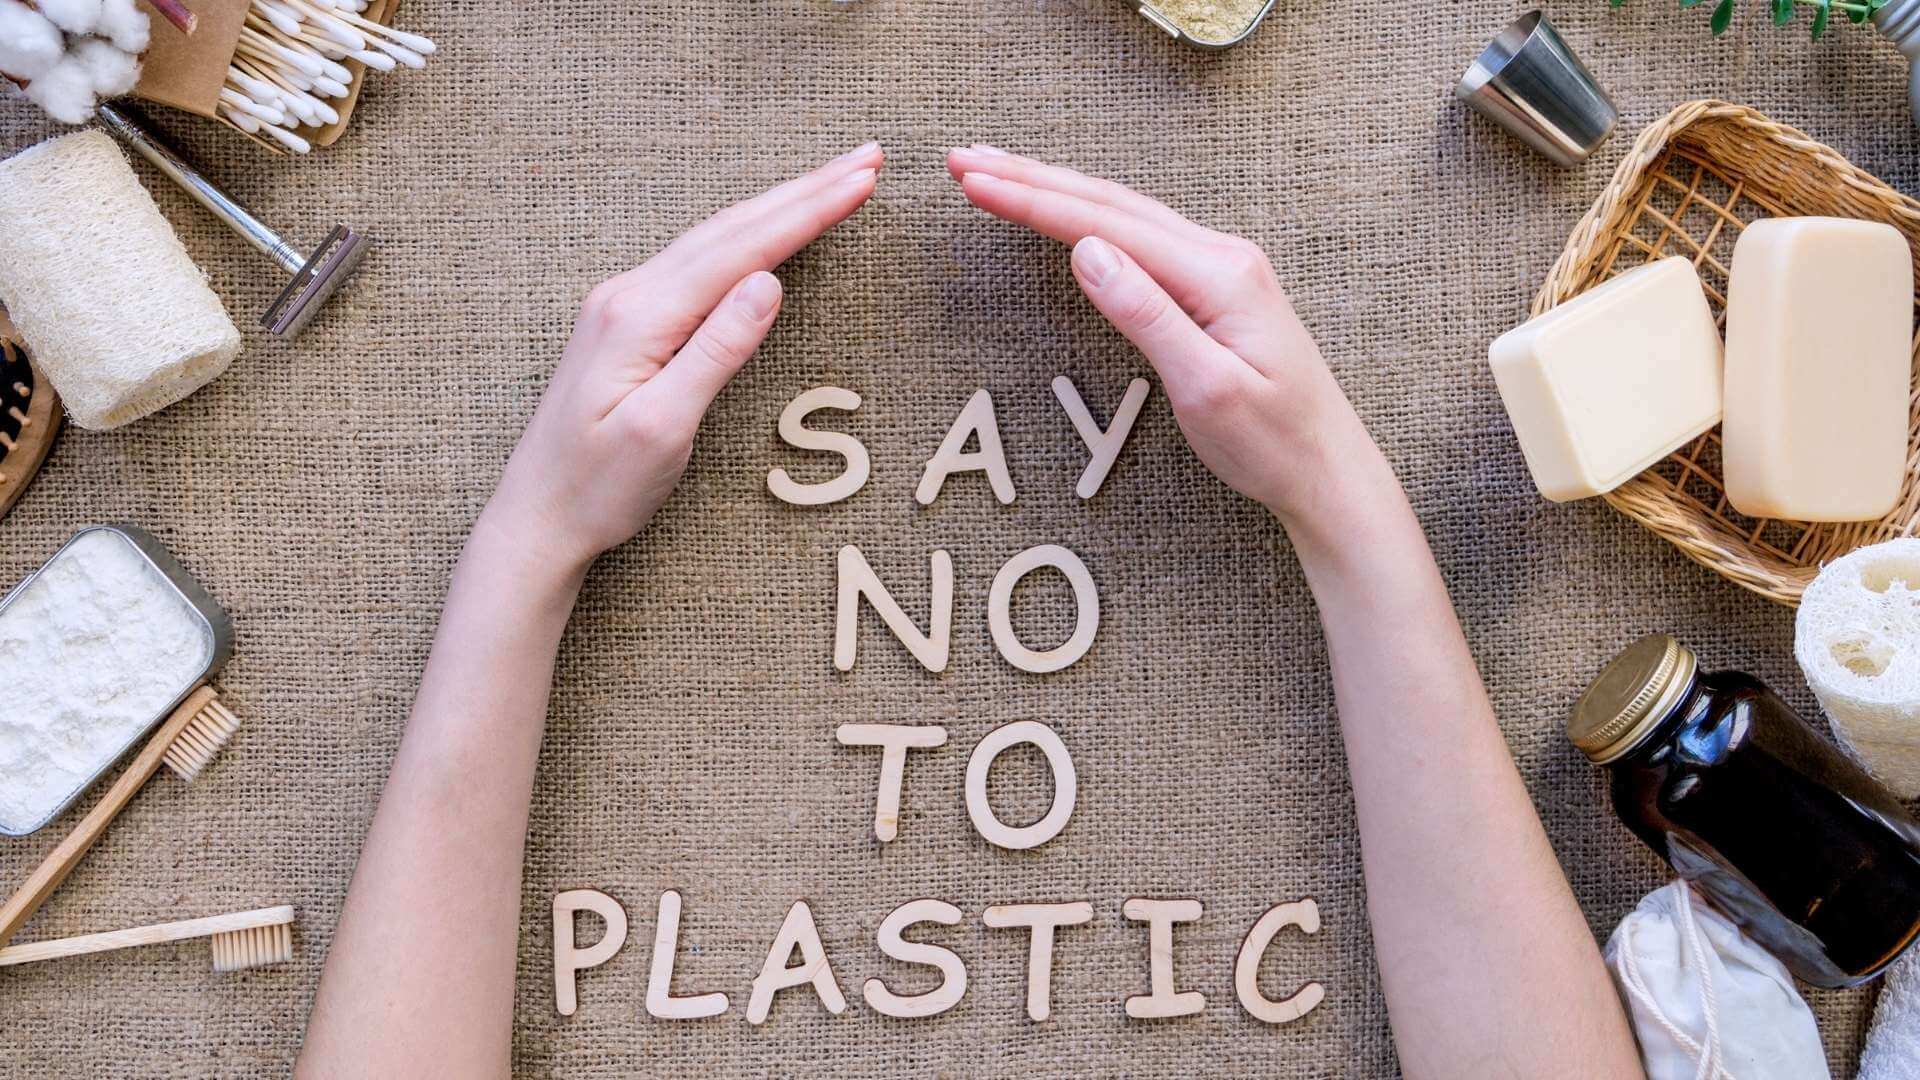 5 Recycled Plastic Items We Use Everyday